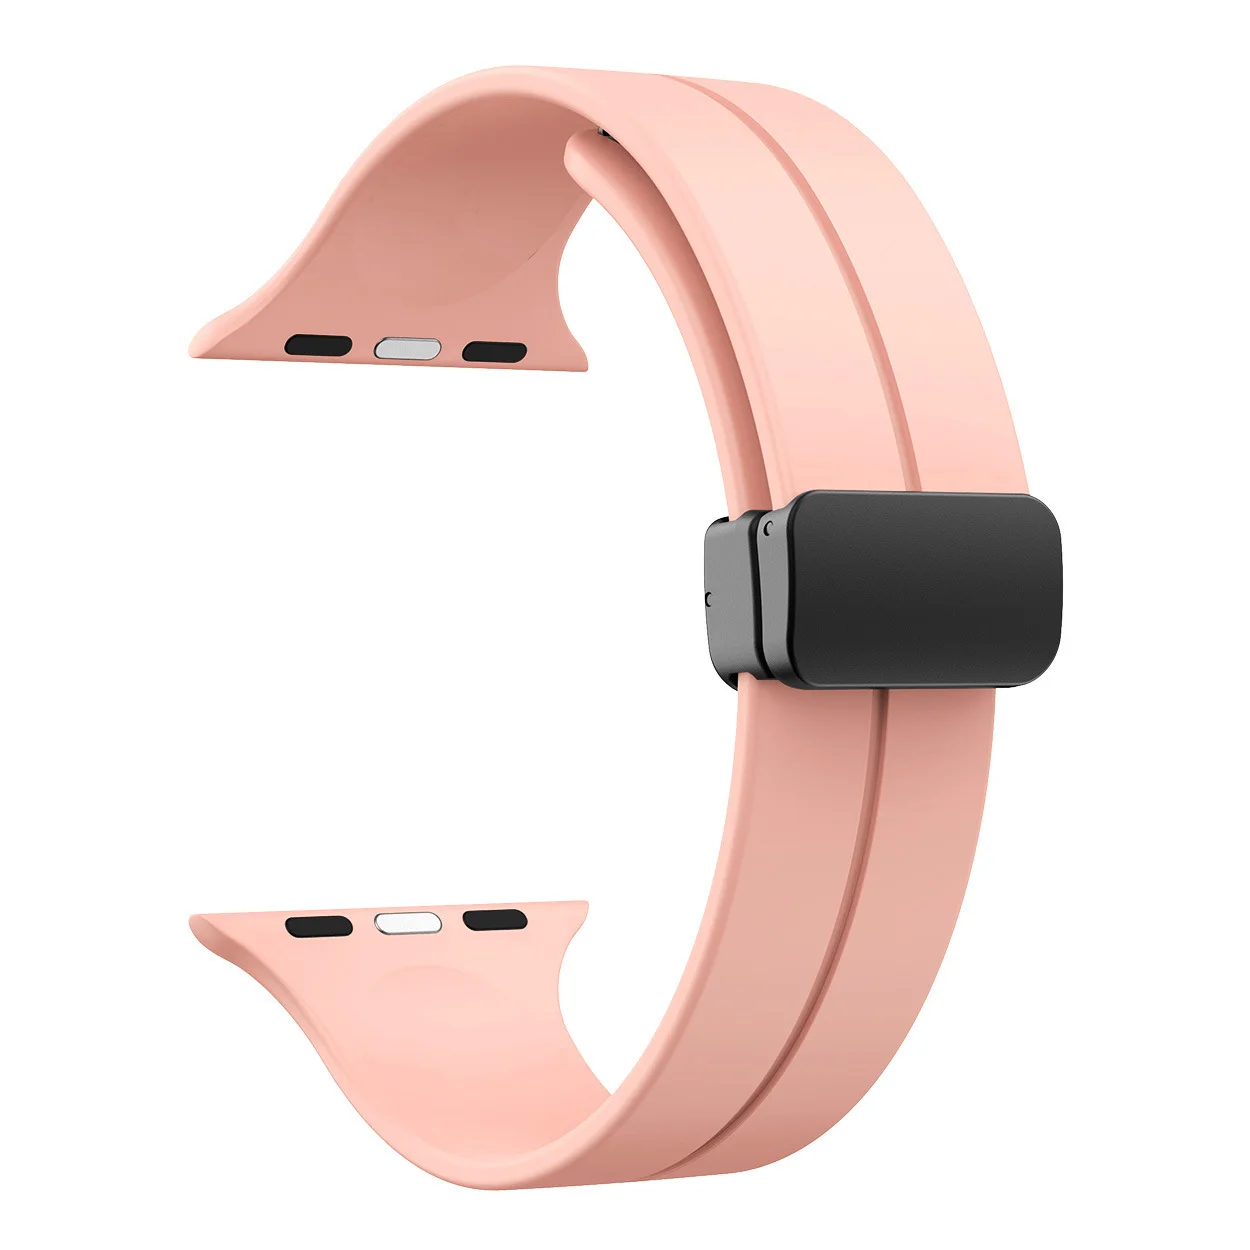 Smart Soft Silicone Band For Iwatch Magnetic Watch Band For Apple Watch ...